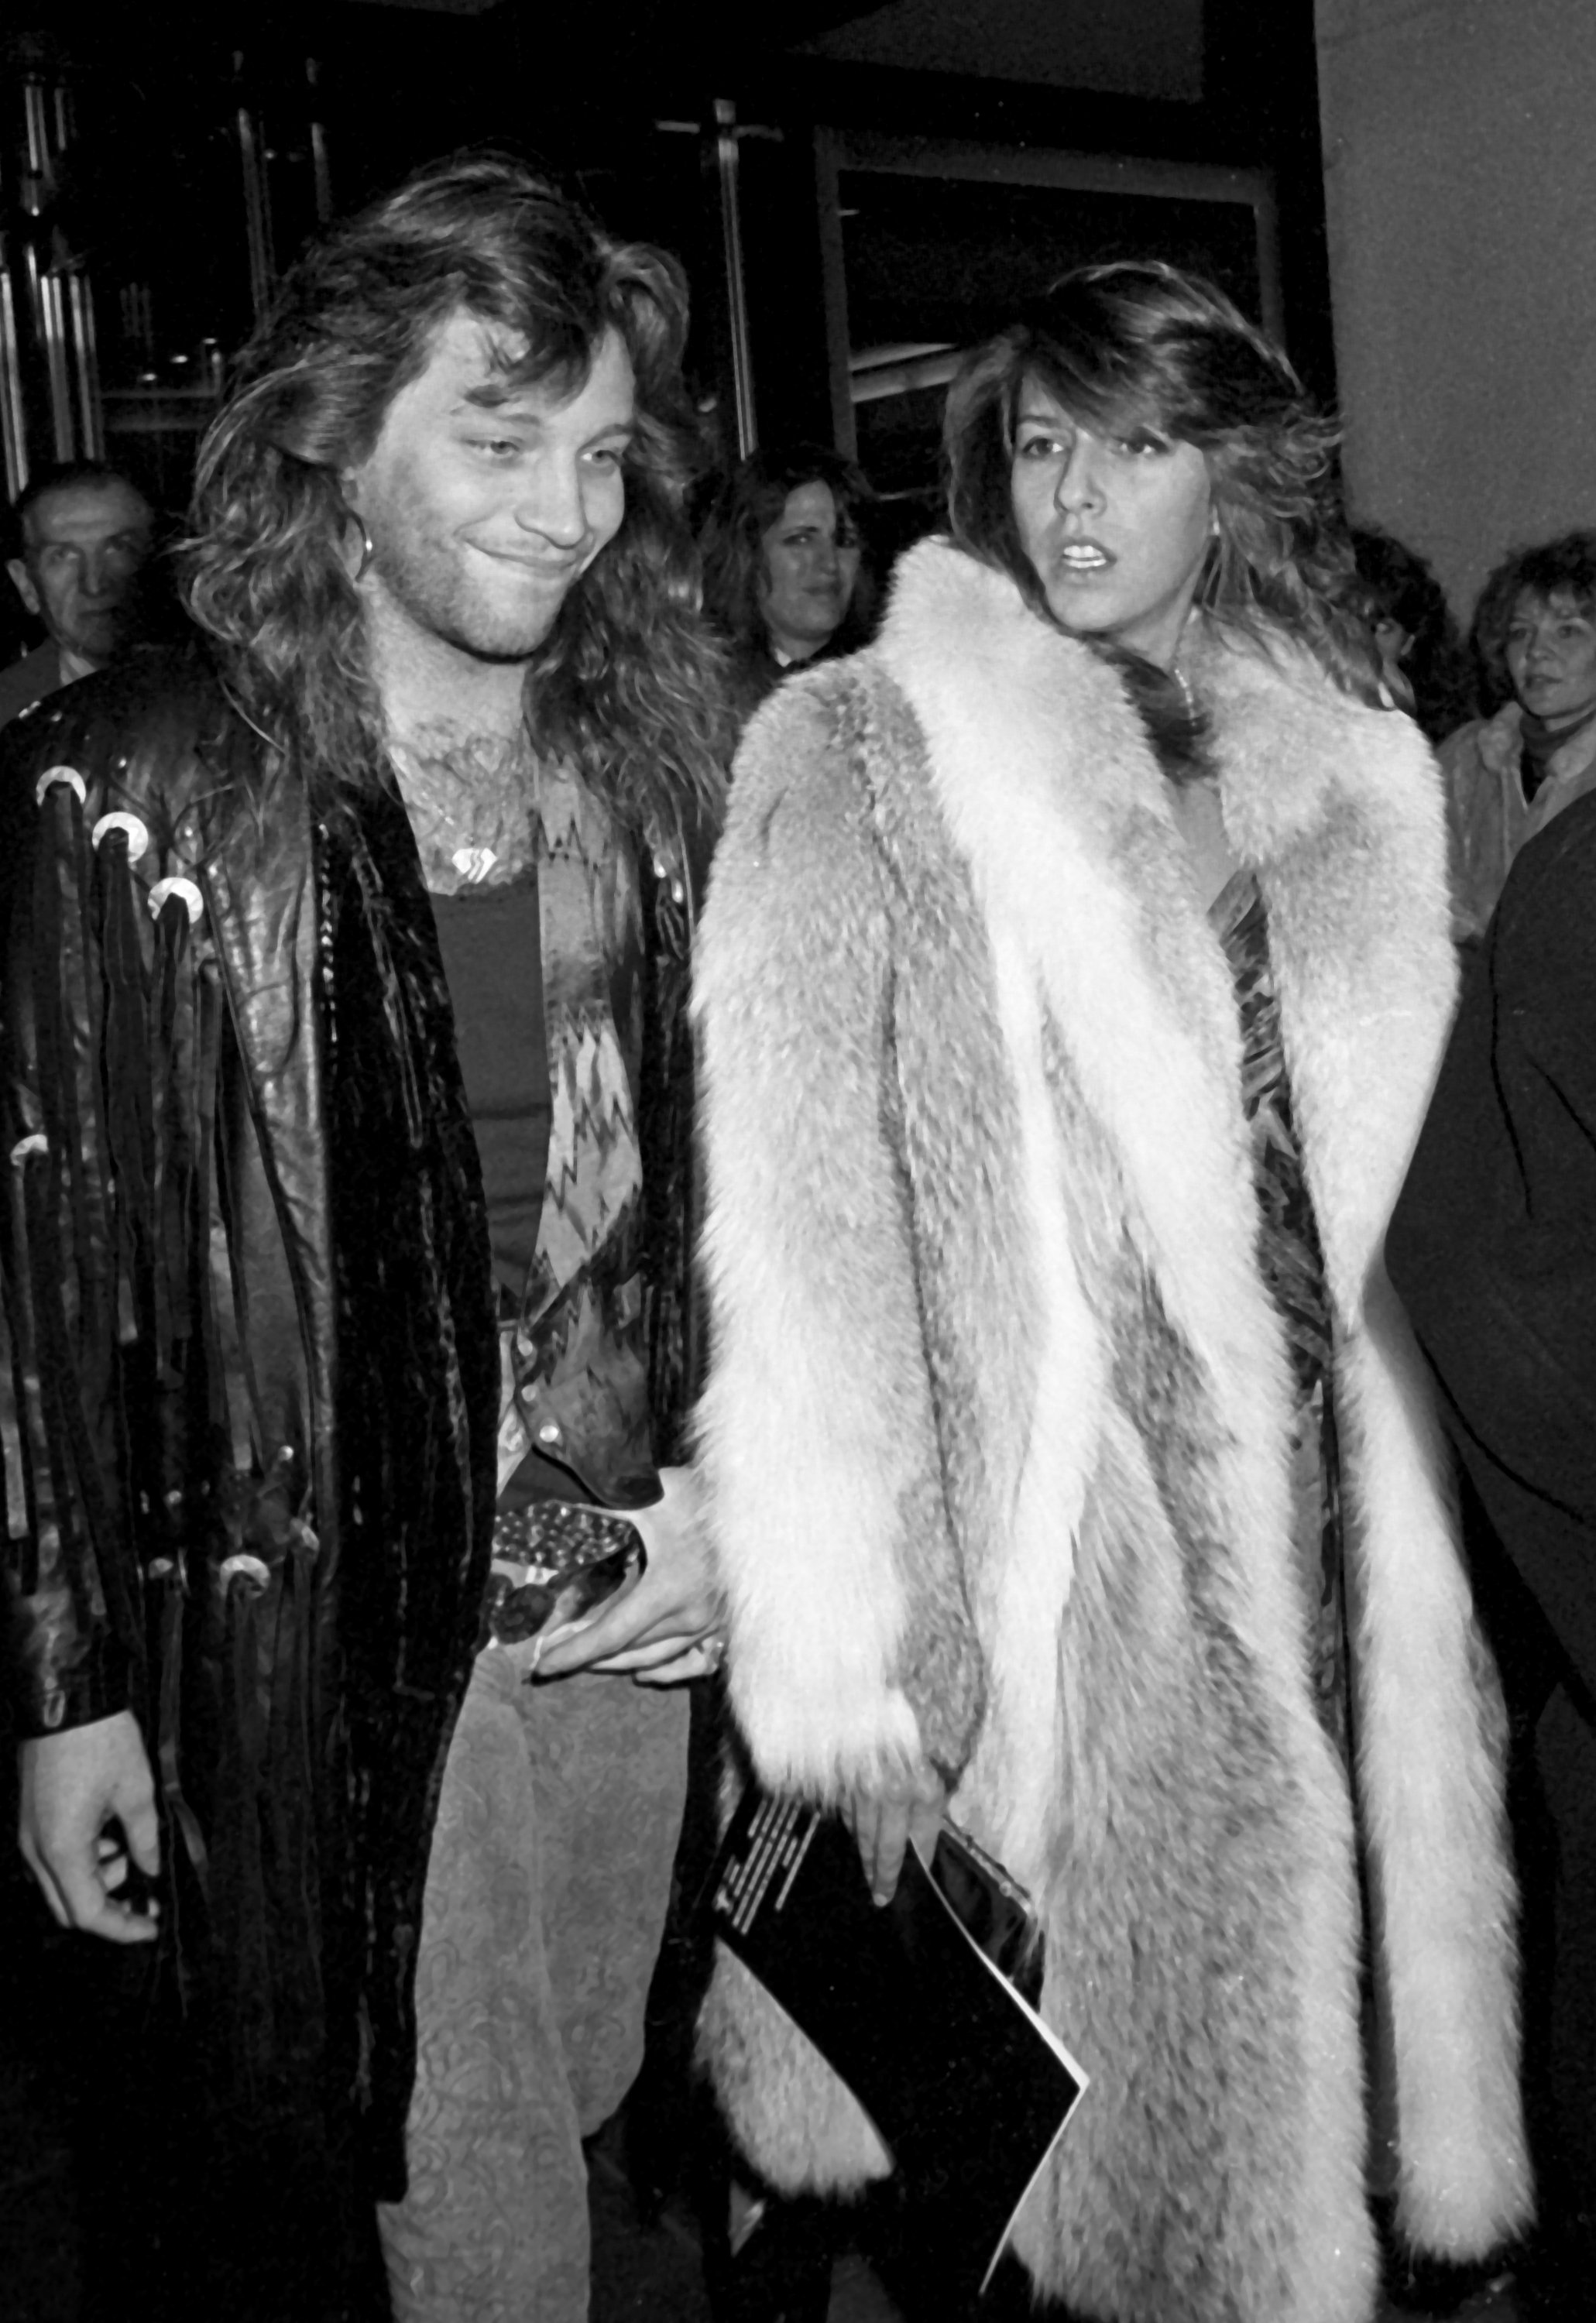 Jon Bon Jovi and Dorothea Hurley are photographed as they arrive at the "Moonstruck" Premiere on December 1, 1987, at the Museum of Modern Art in New York City | Source: Getty Images